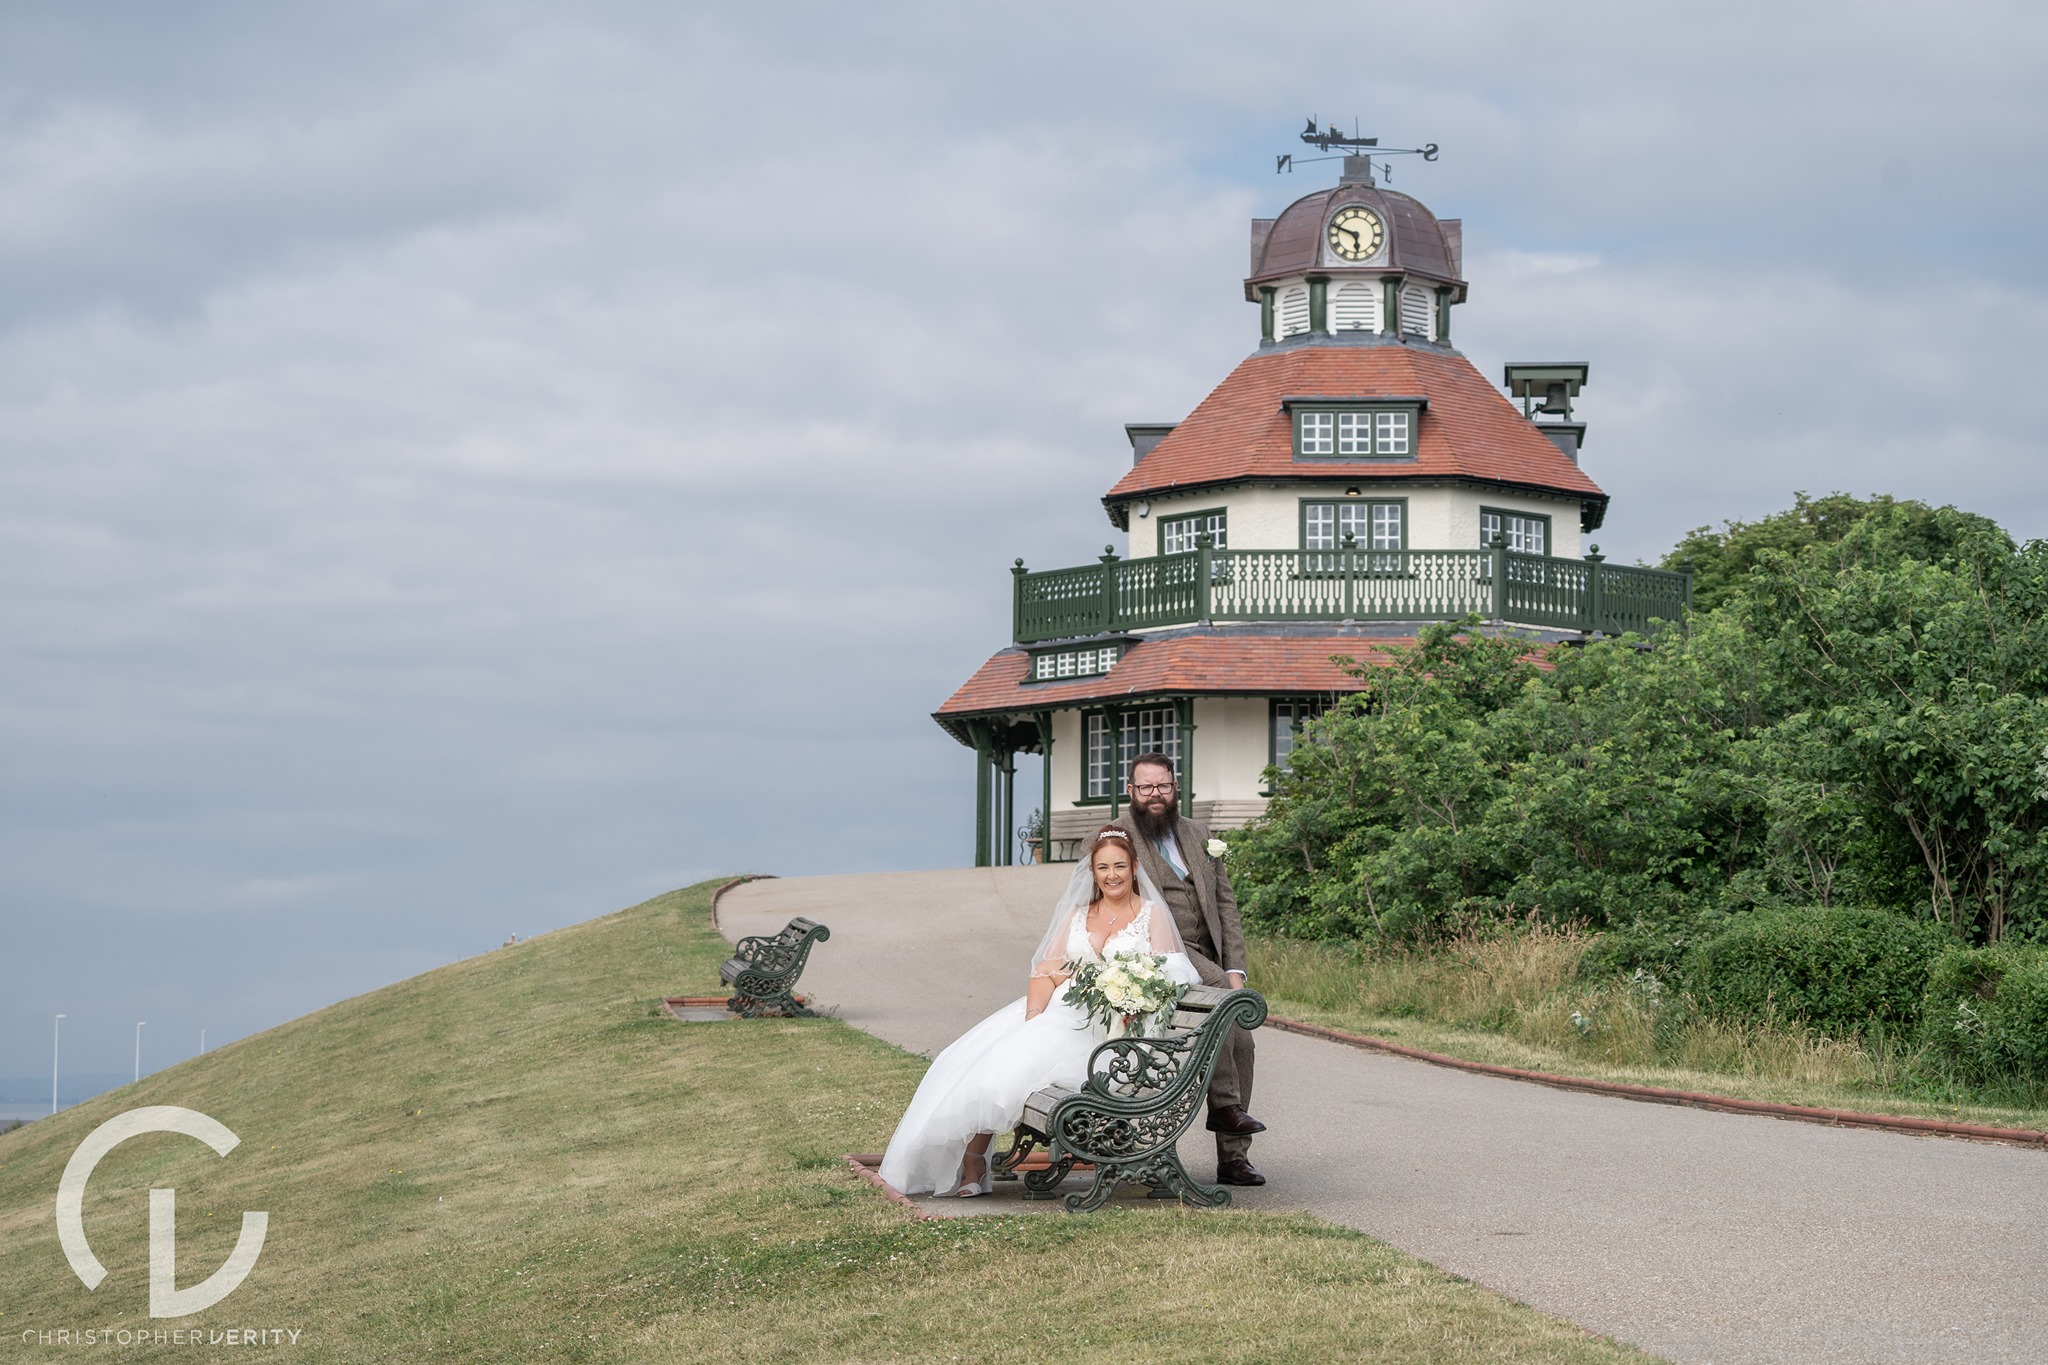 A couple in wedding dress sat on a bench in front of the Mount pavilion in Fleetwood